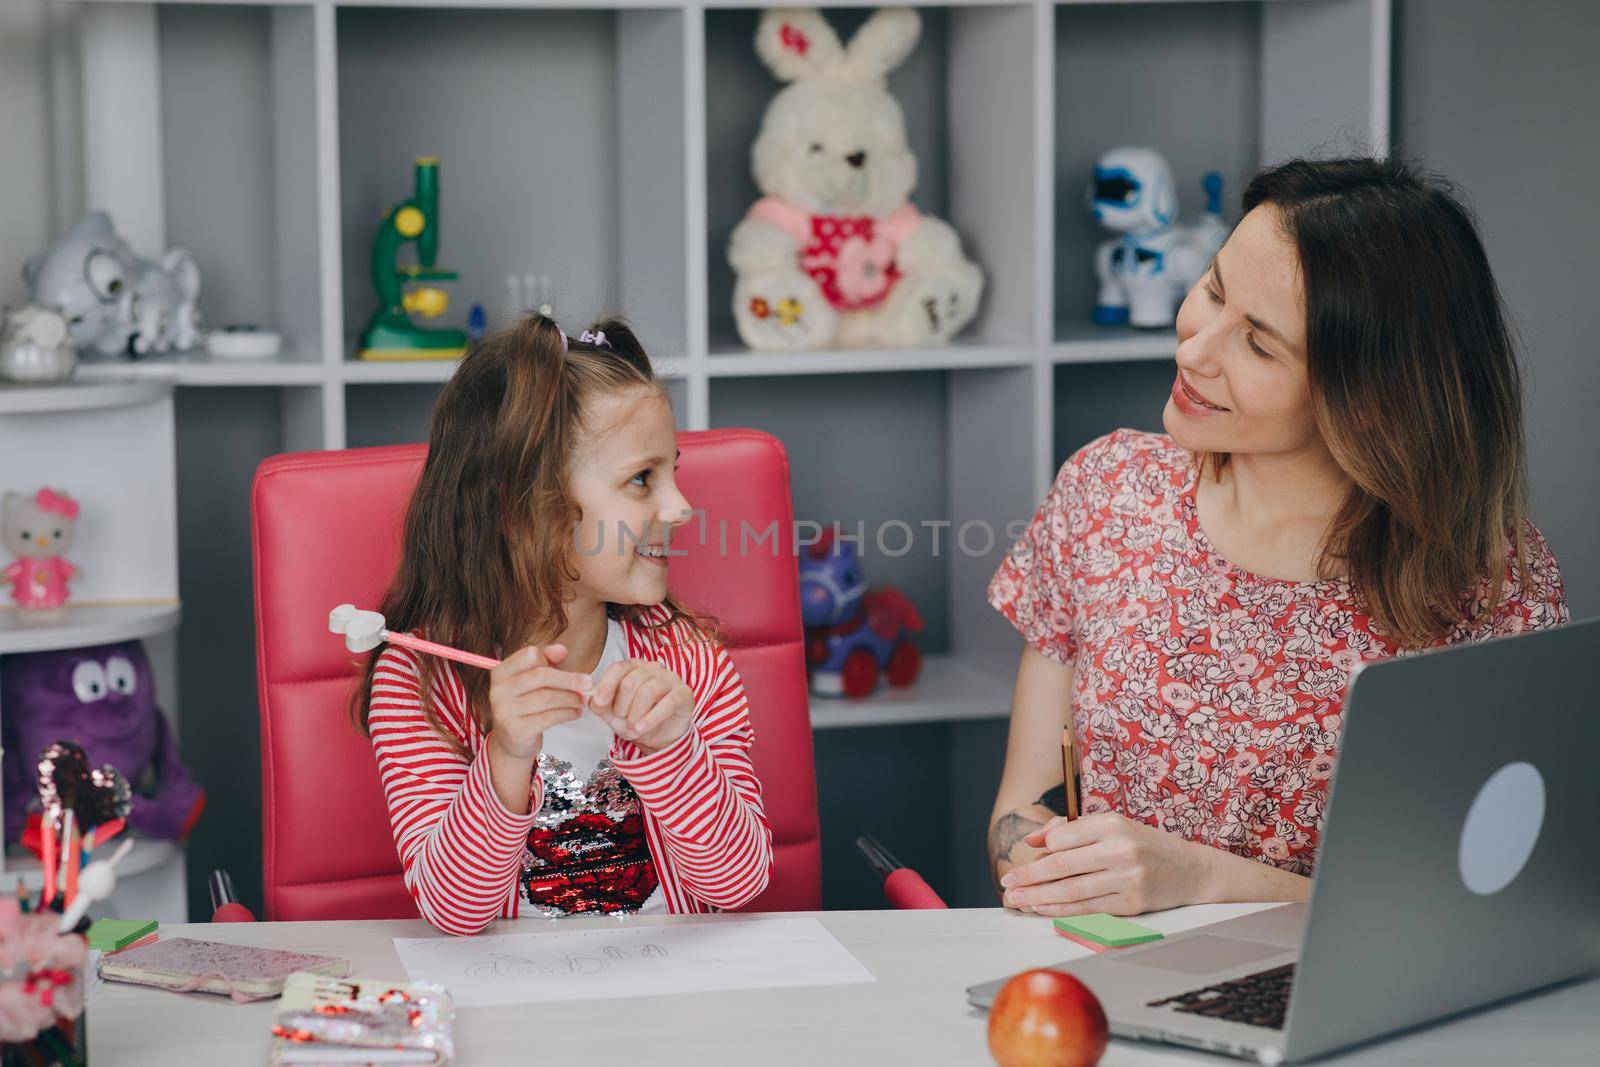 Woman tutor or foster parent mum helping cute caucasian school child girl doing homework sitting at kitchen table. Diverse nanny and kid learning writing in notebook studying at home.